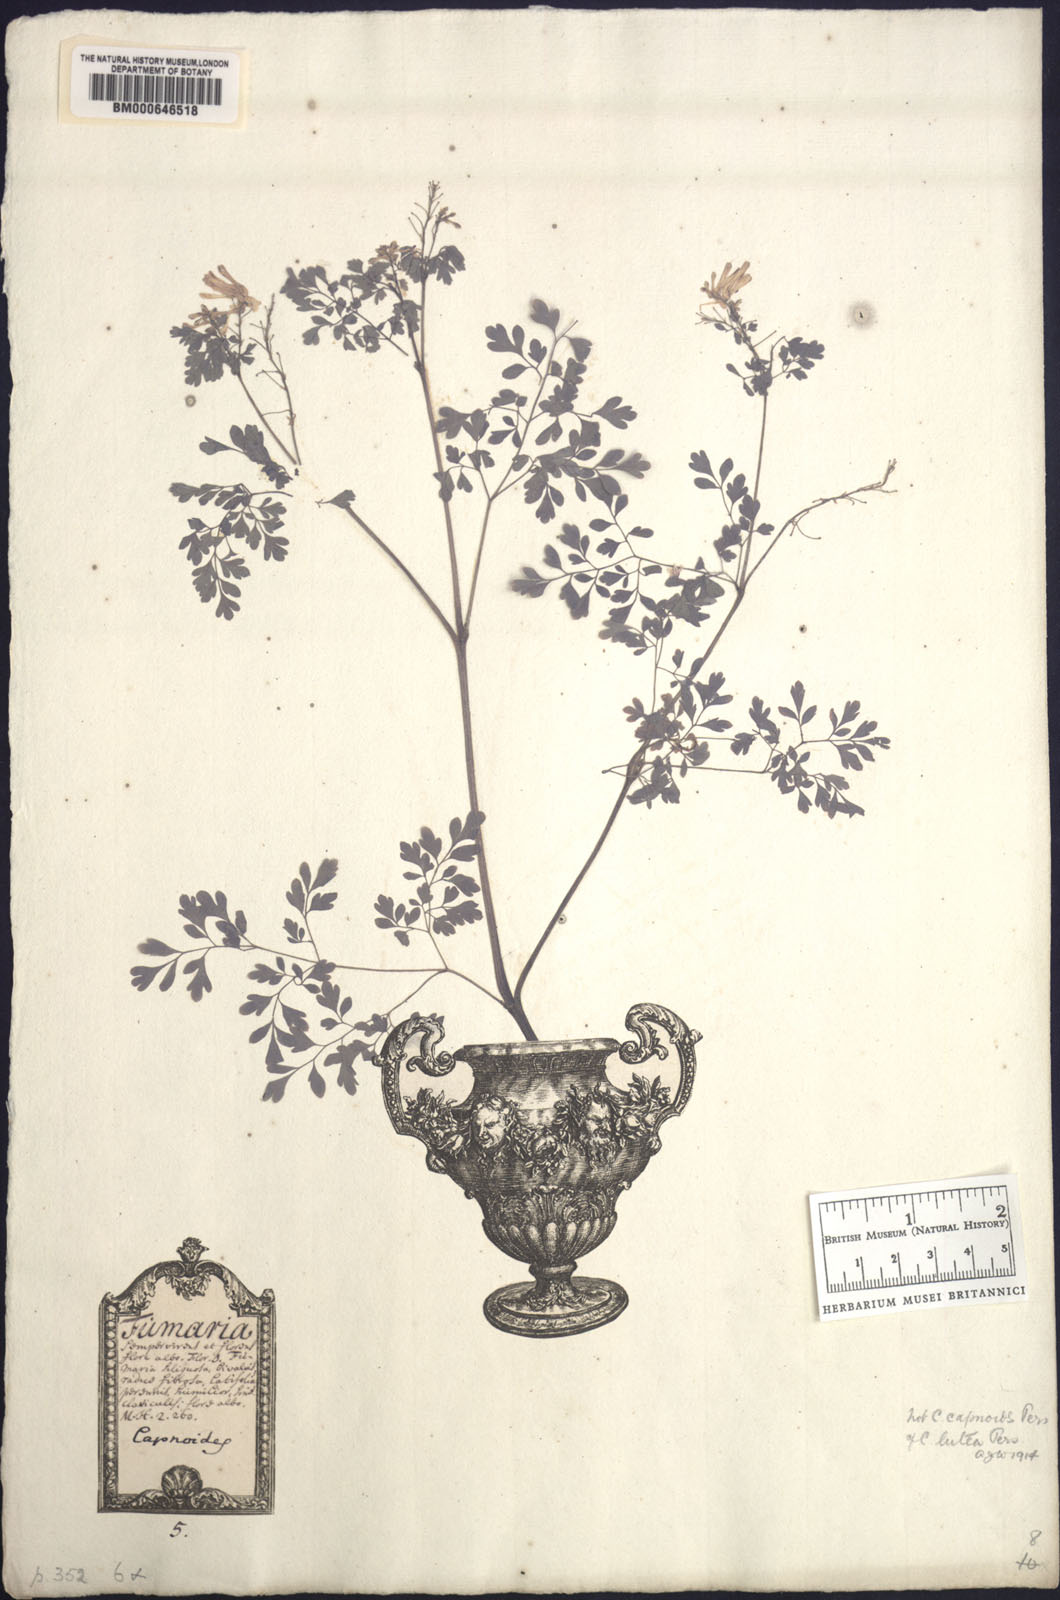 http://www.nhm.ac.uk/resources/research-curation/projects/clifford-herbarium/lgimages/BM000646518.JPG